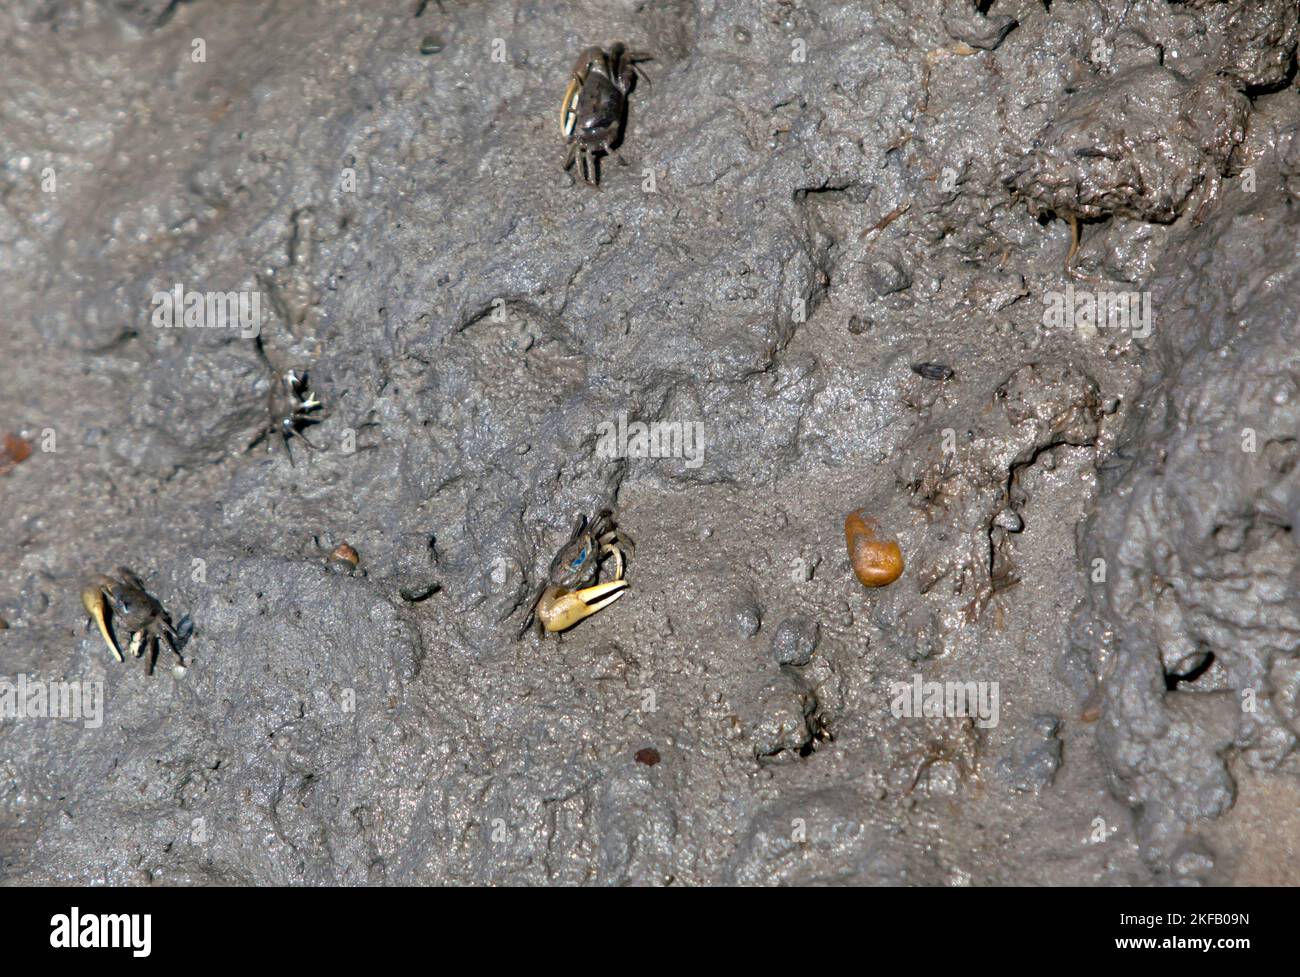 Fiddler Crabs living in a muddy bank, at the Kayak Launching area at the Eastern Shore of Virginia National Wildlife Refuge,  Delmarva Peninsula, Stock Photo